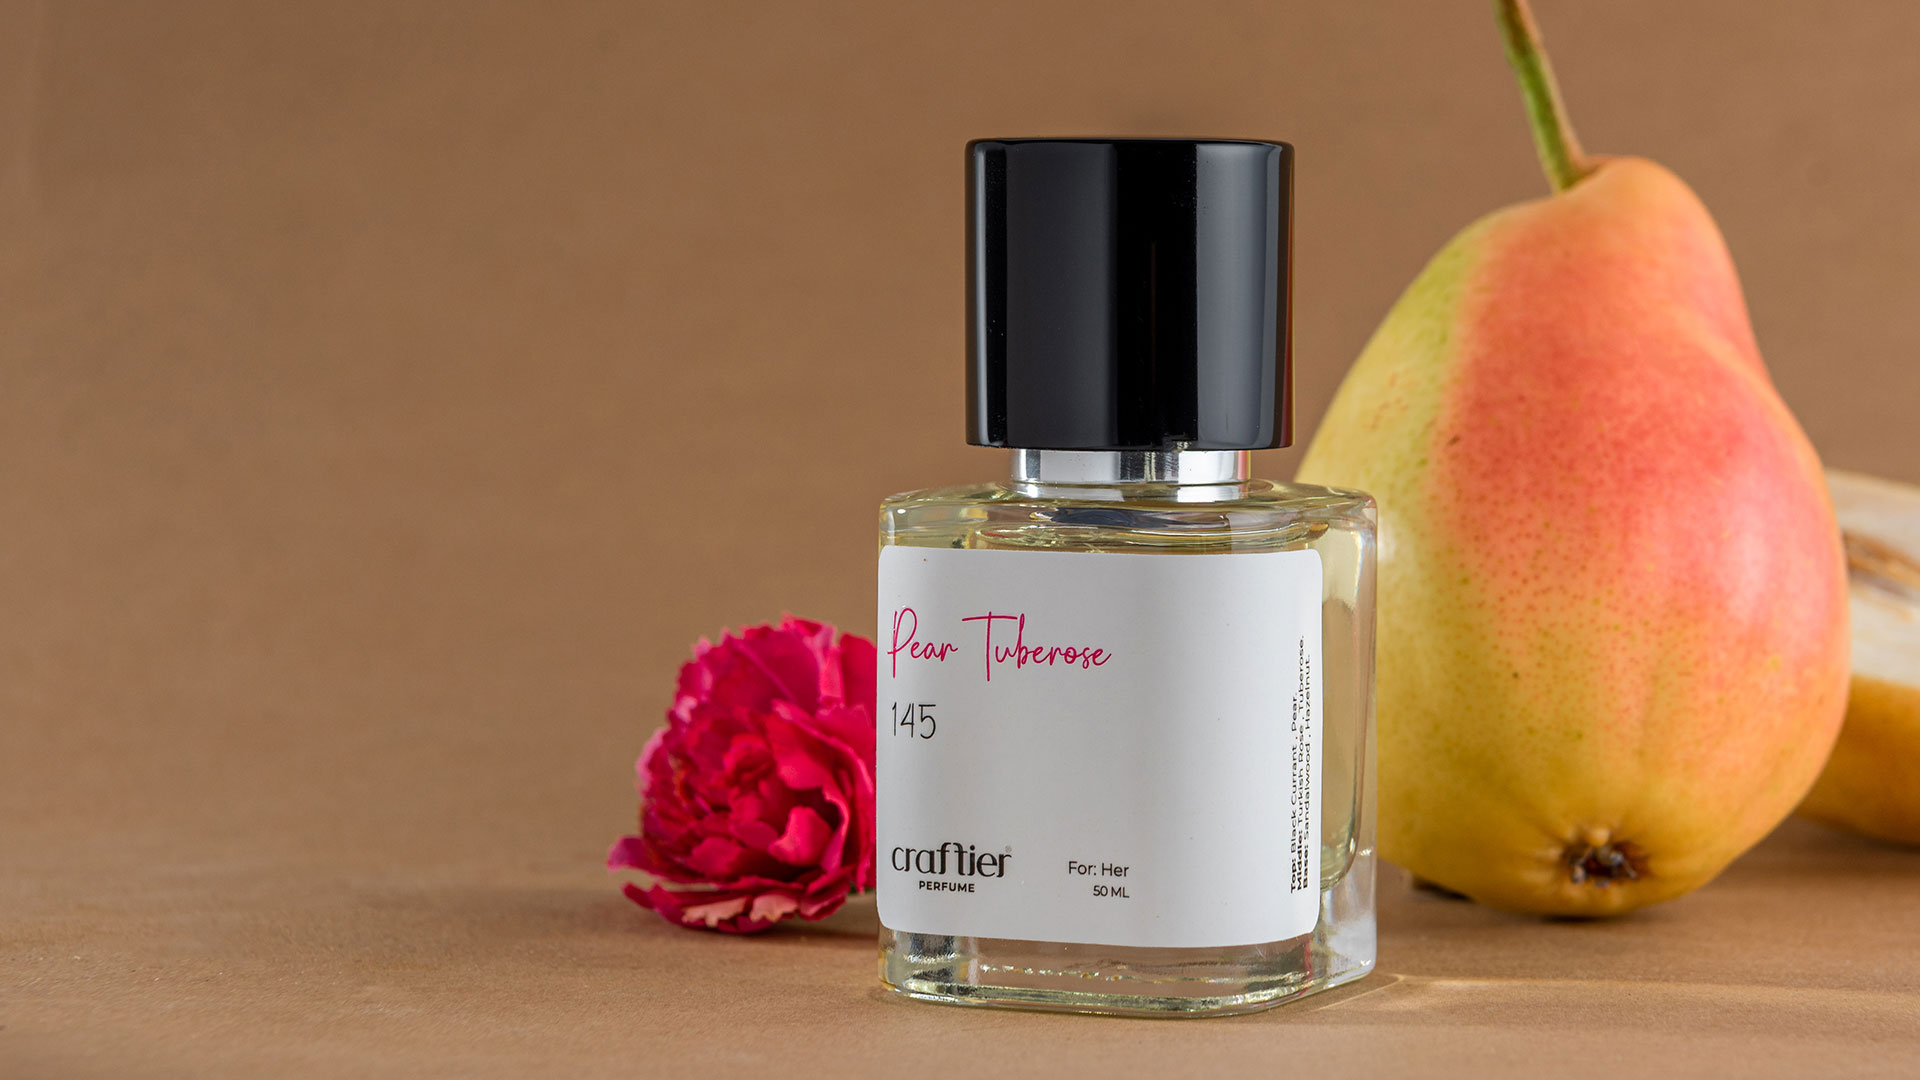 Does Sweet Smell Perfume Have Long-Lasting Staying Power? ​